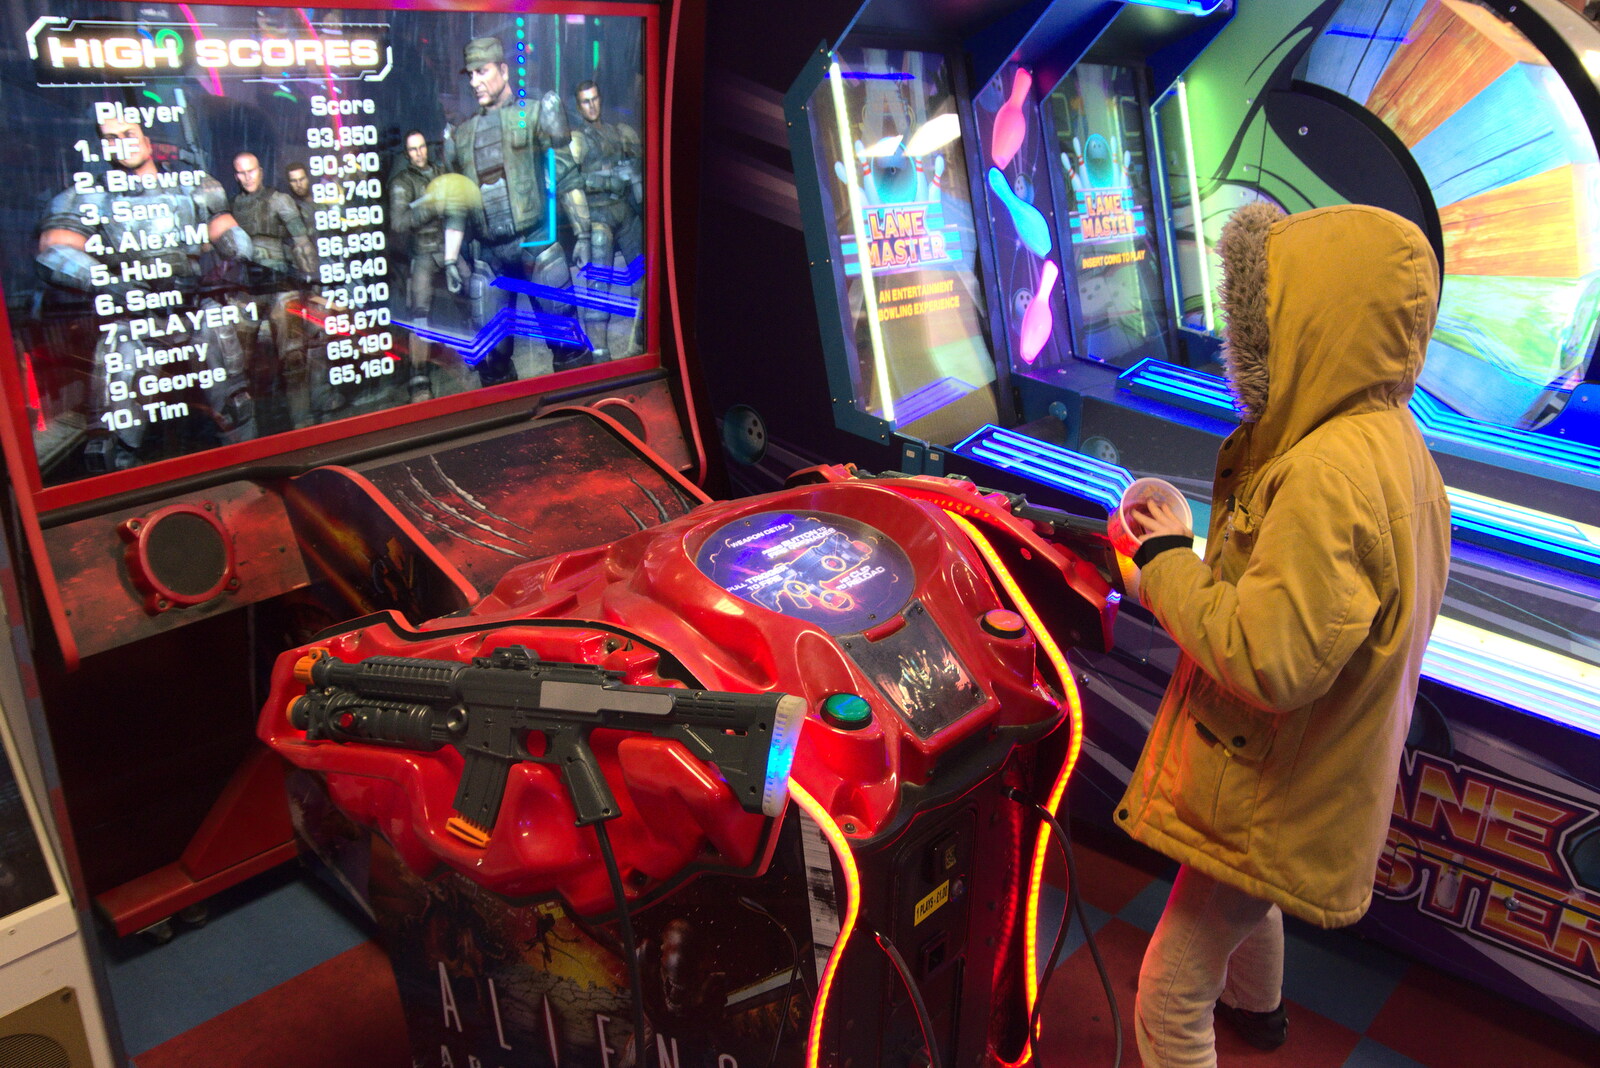 Harry looks at the Aliens shoot-em-up game from Genesis at the O2, North Greenwich, London - 24th March 2022